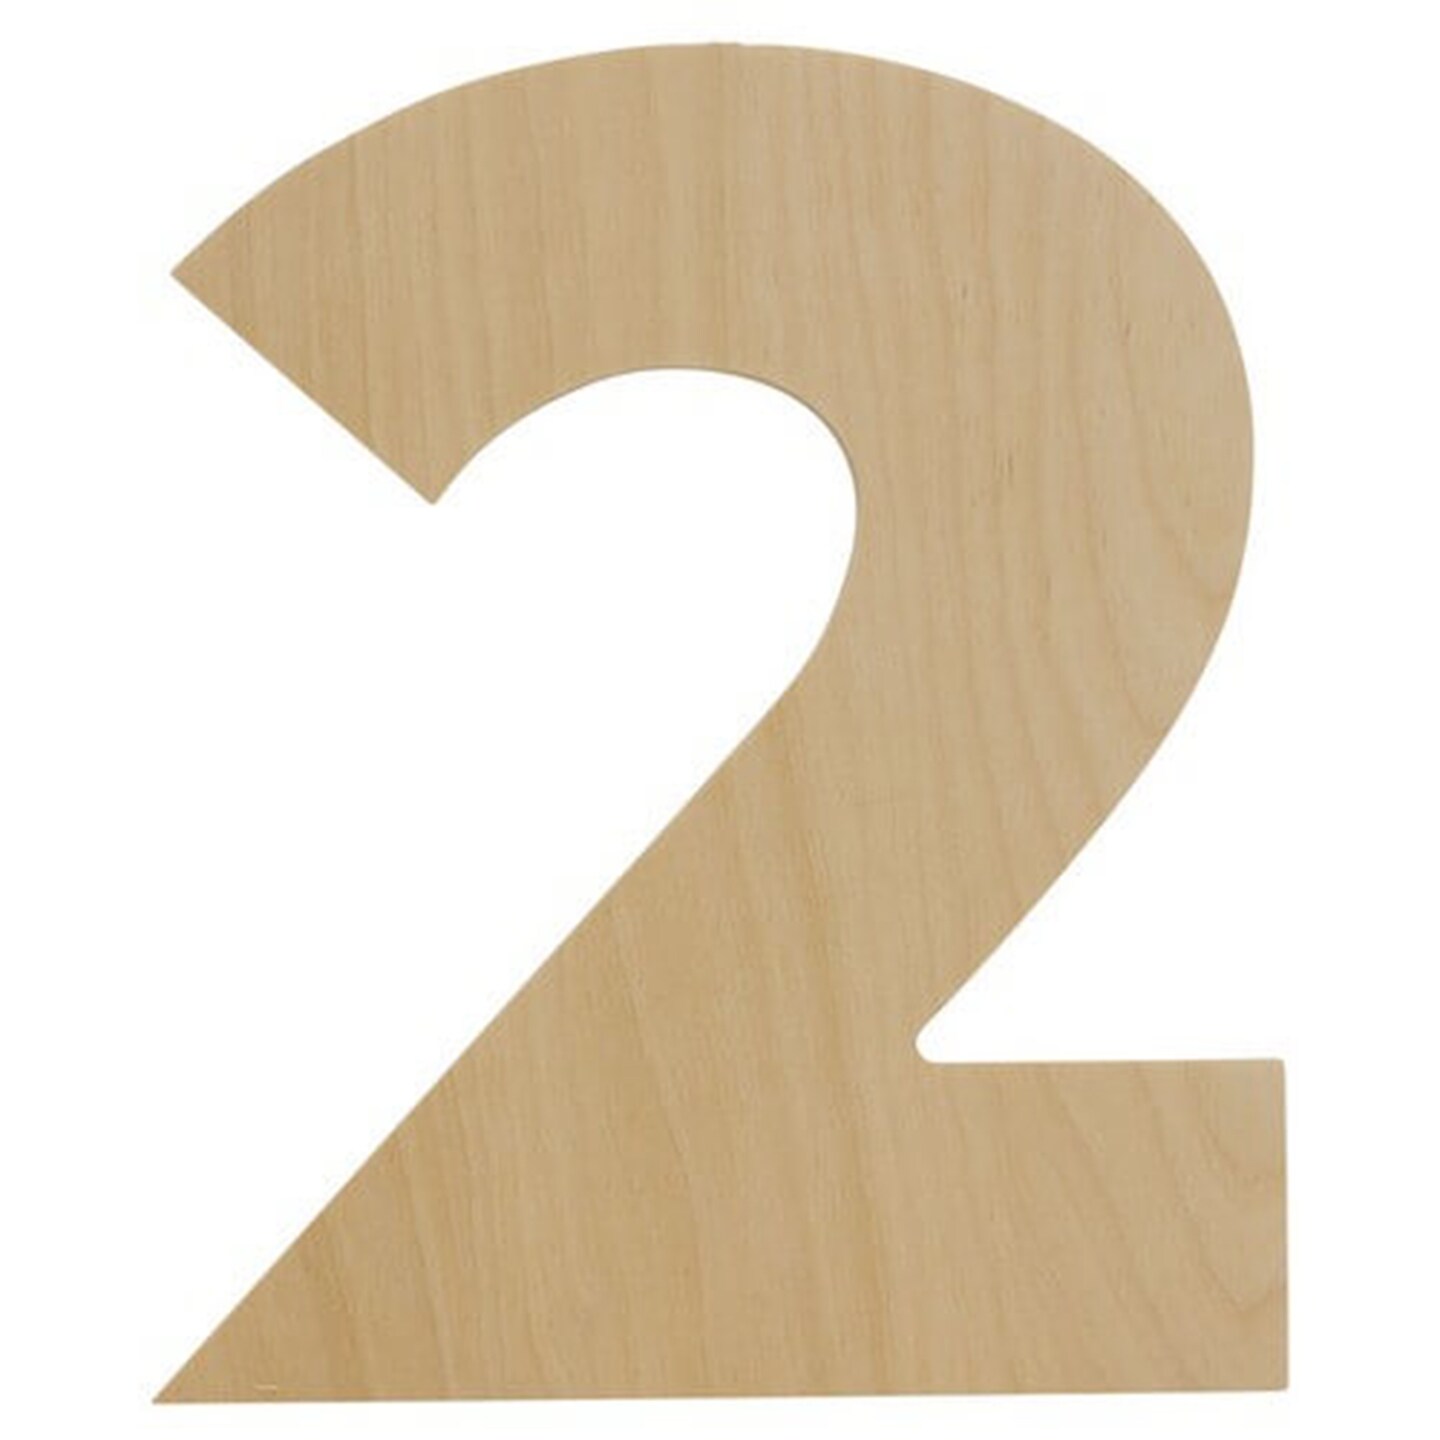 Wooden Number 2, 12 inch or 8 inch, Unfinished Large Wood Numbers for Crafts | Woodpeckers